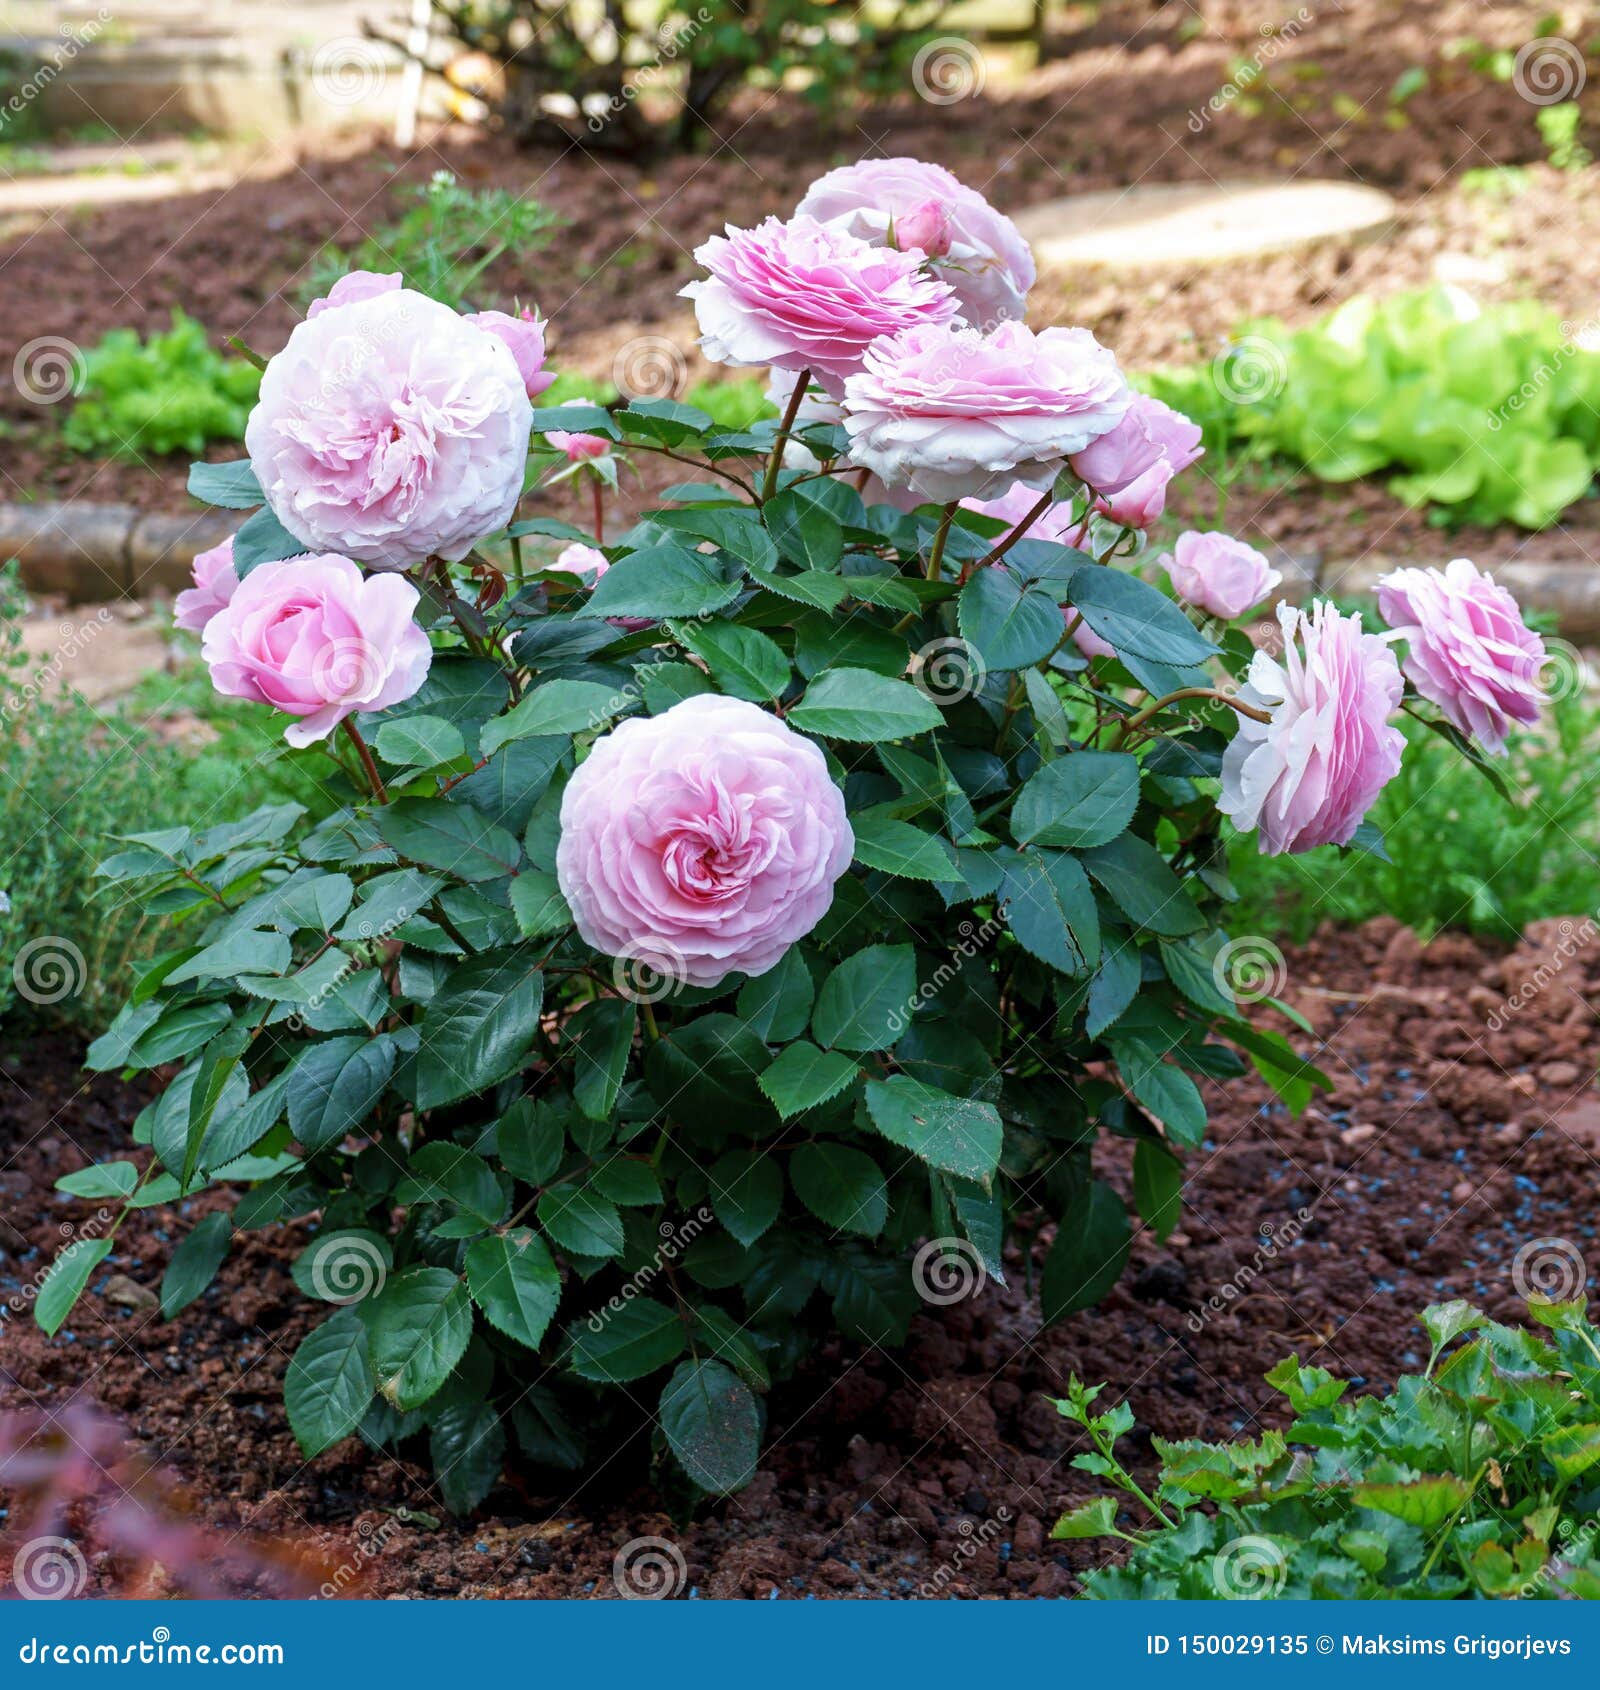 Blooming English Peony Rose Shrub In The Garden On A Sunny Day Olivia David Austin Stock Image Image Of Beauty English